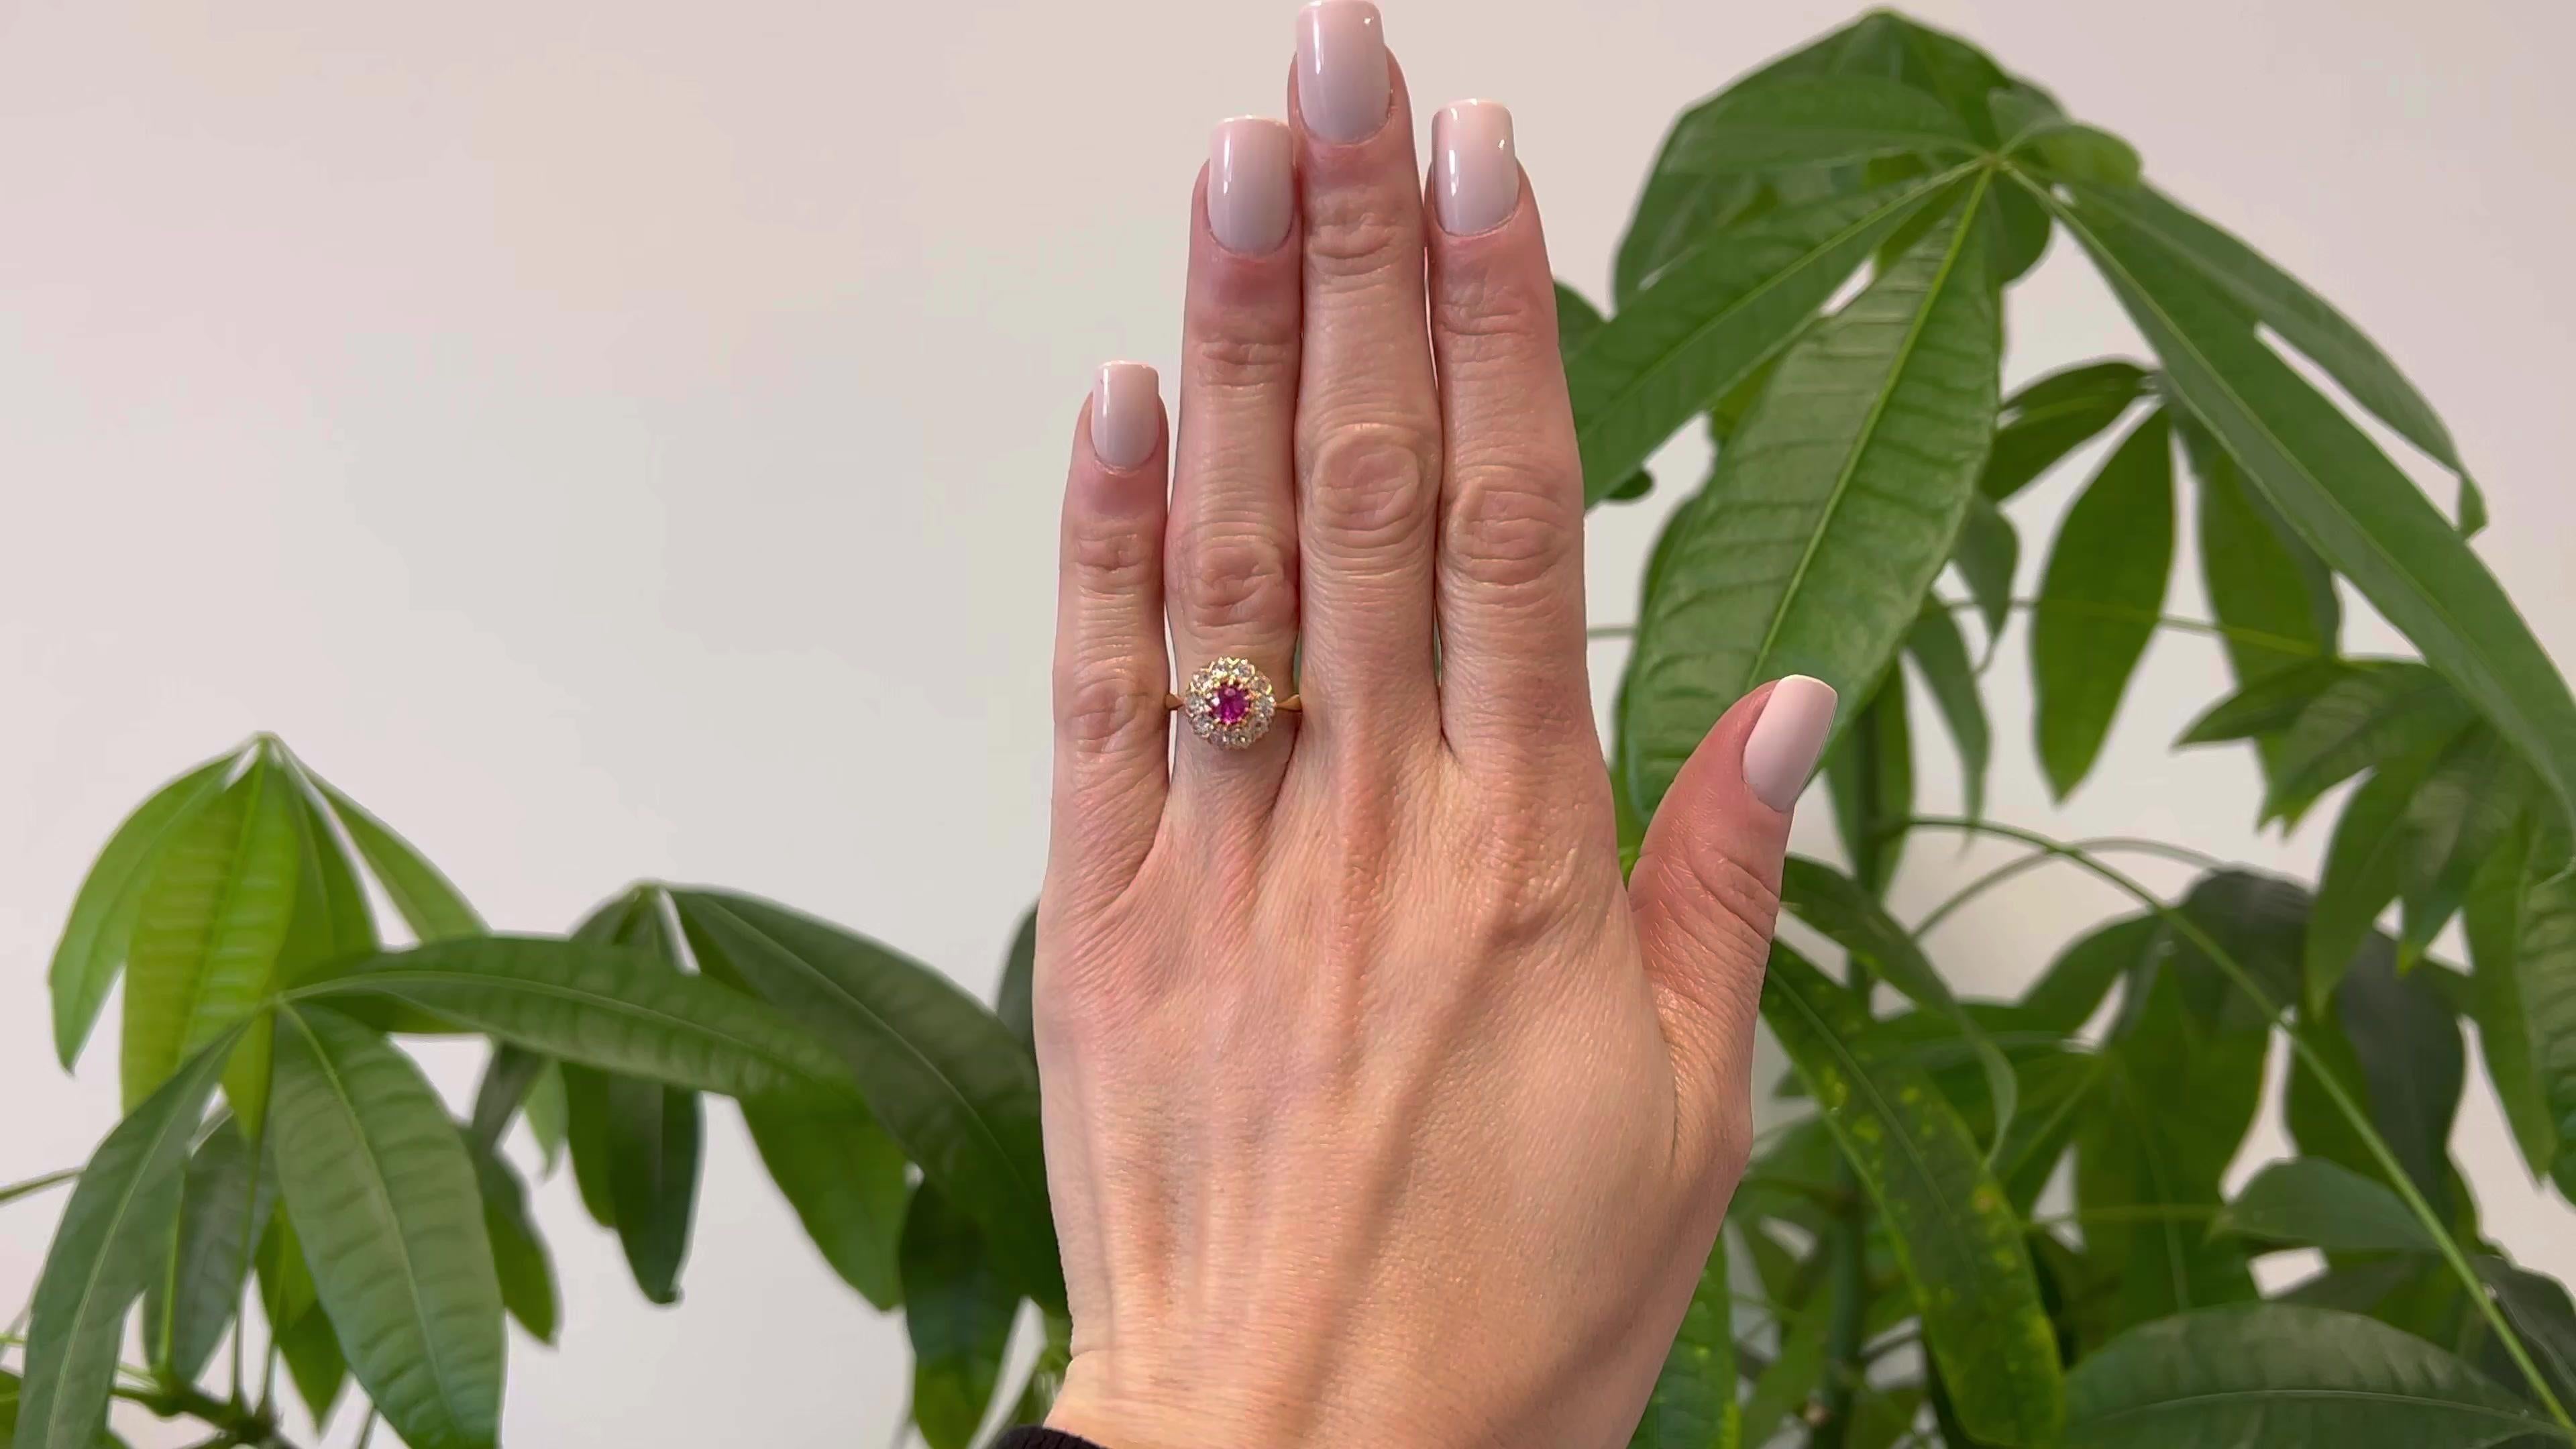 One Edwardian Pink Sapphire Diamond 18k Yellow Gold Cluster Ring. Featuring one round mixed cut pink sapphire weighing approximately 0.40 carat. Accented by 10 old mine cut diamonds with a total weight of approximately 0.70 carat, graded near